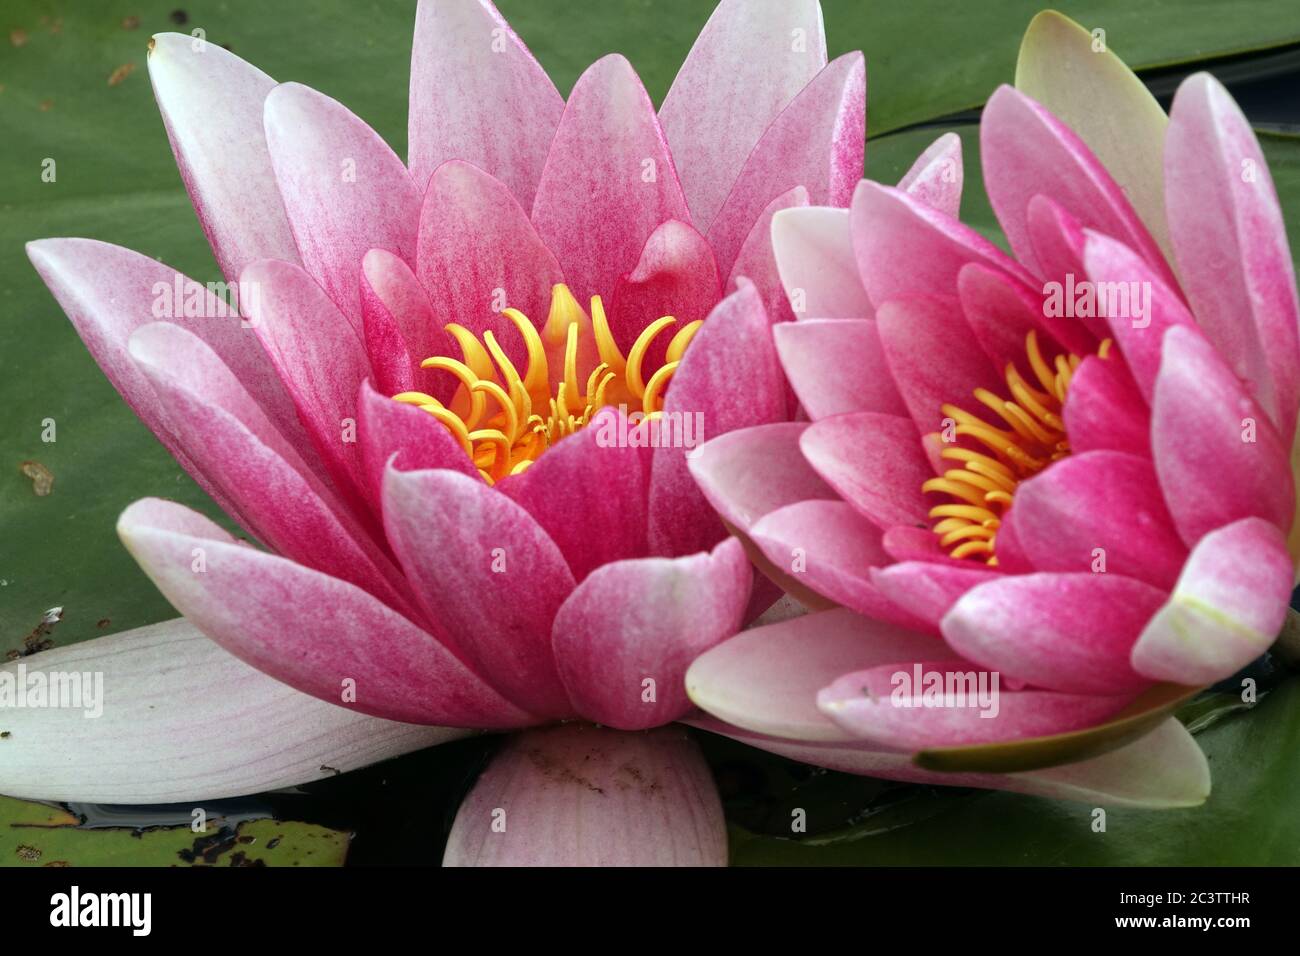 Two pink water lilies beauty flowers Stock Photo